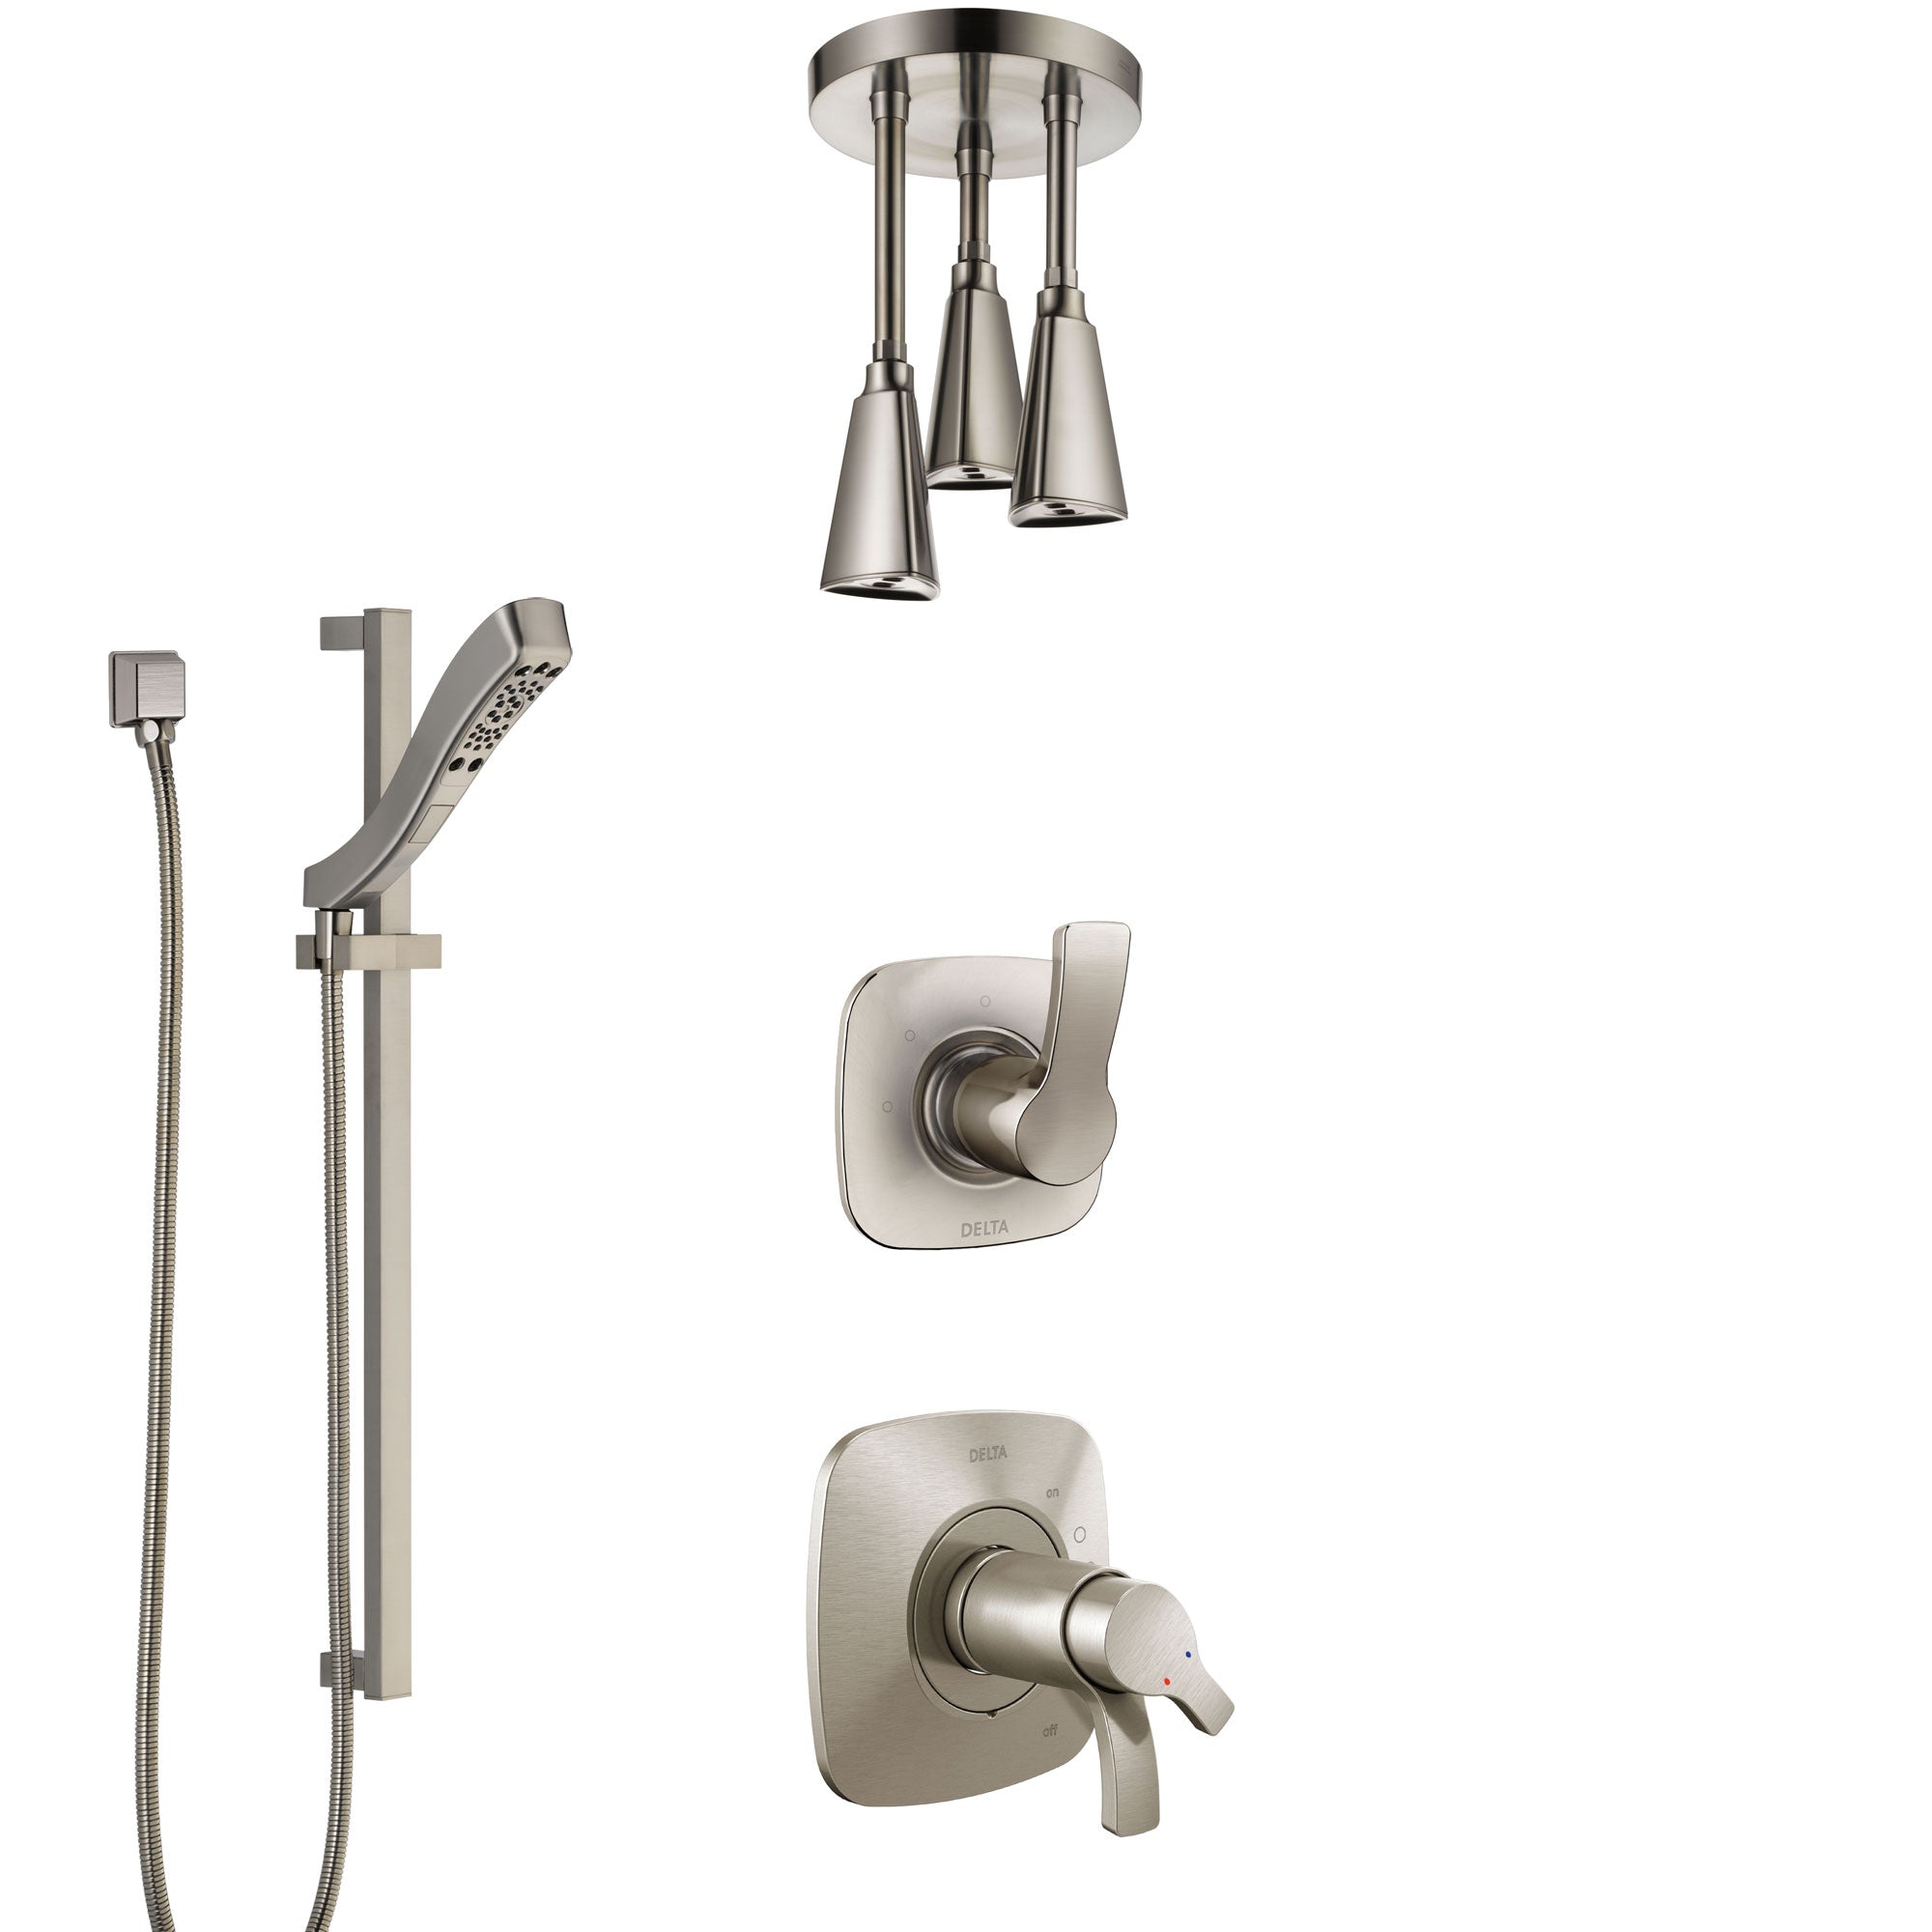 Delta Tesla Dual Thermostatic Control Handle Stainless Steel Finish Shower System, Diverter, Ceiling Mount Showerhead, and Hand Shower SS17T522SS4